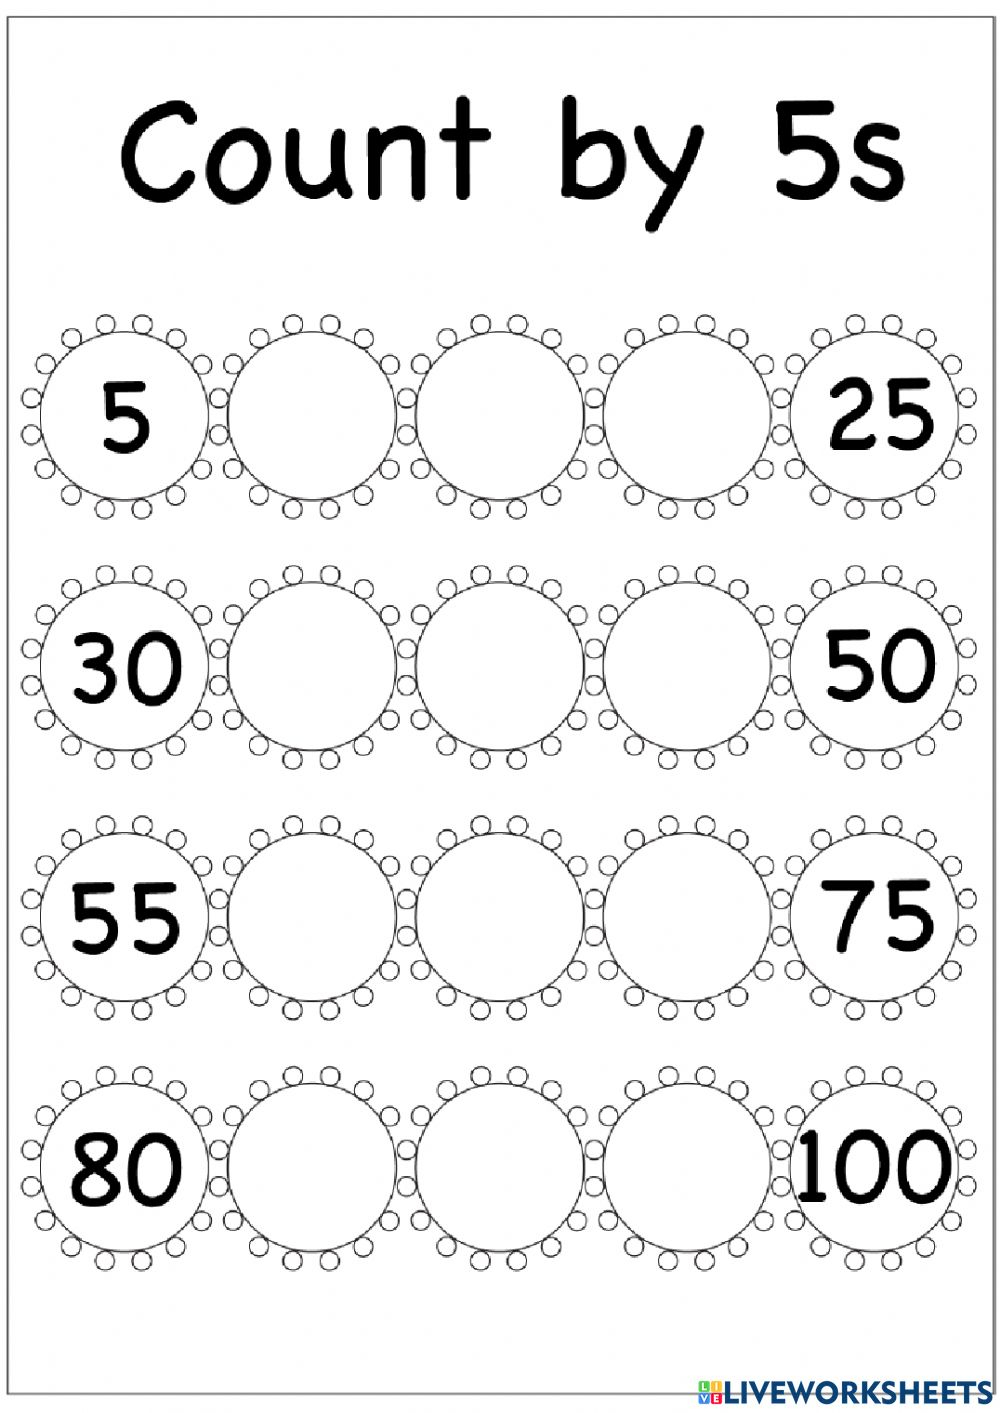 skip-counting-by-5s-interactive-worksheet-countingworksheets